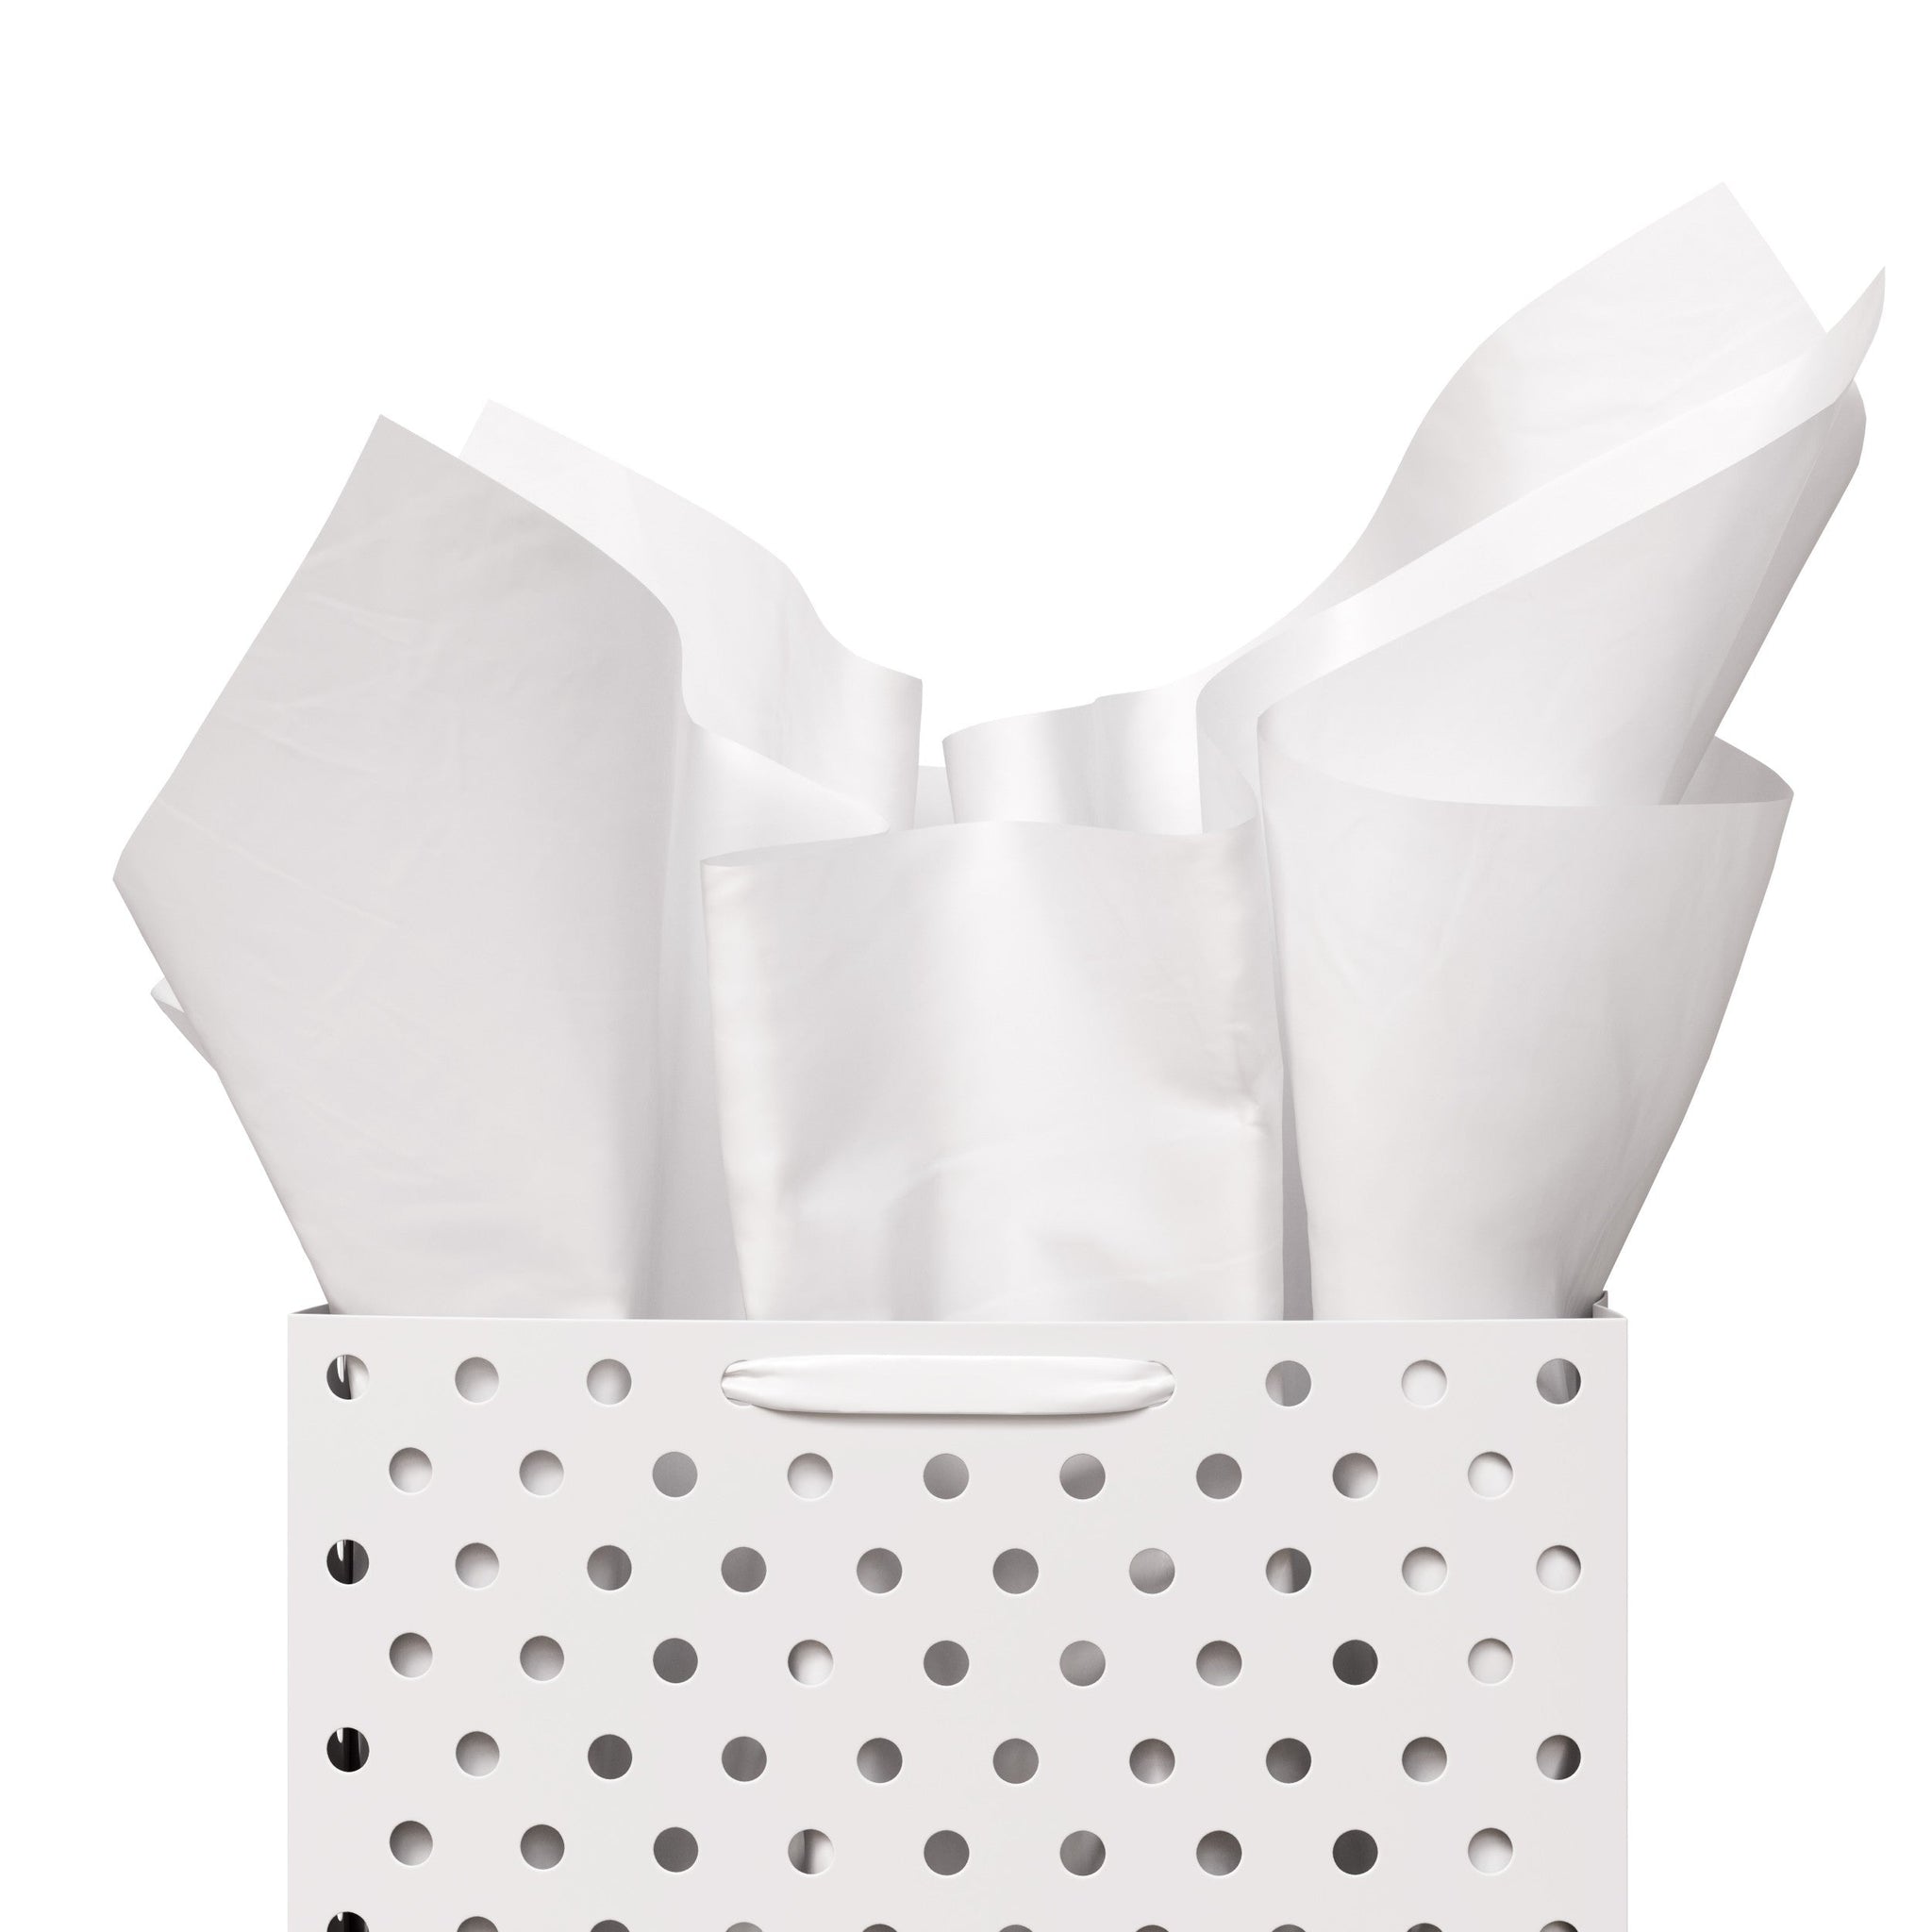 White Tissue Paper 20x30 inch - Case Qty. (2880 Sheets)